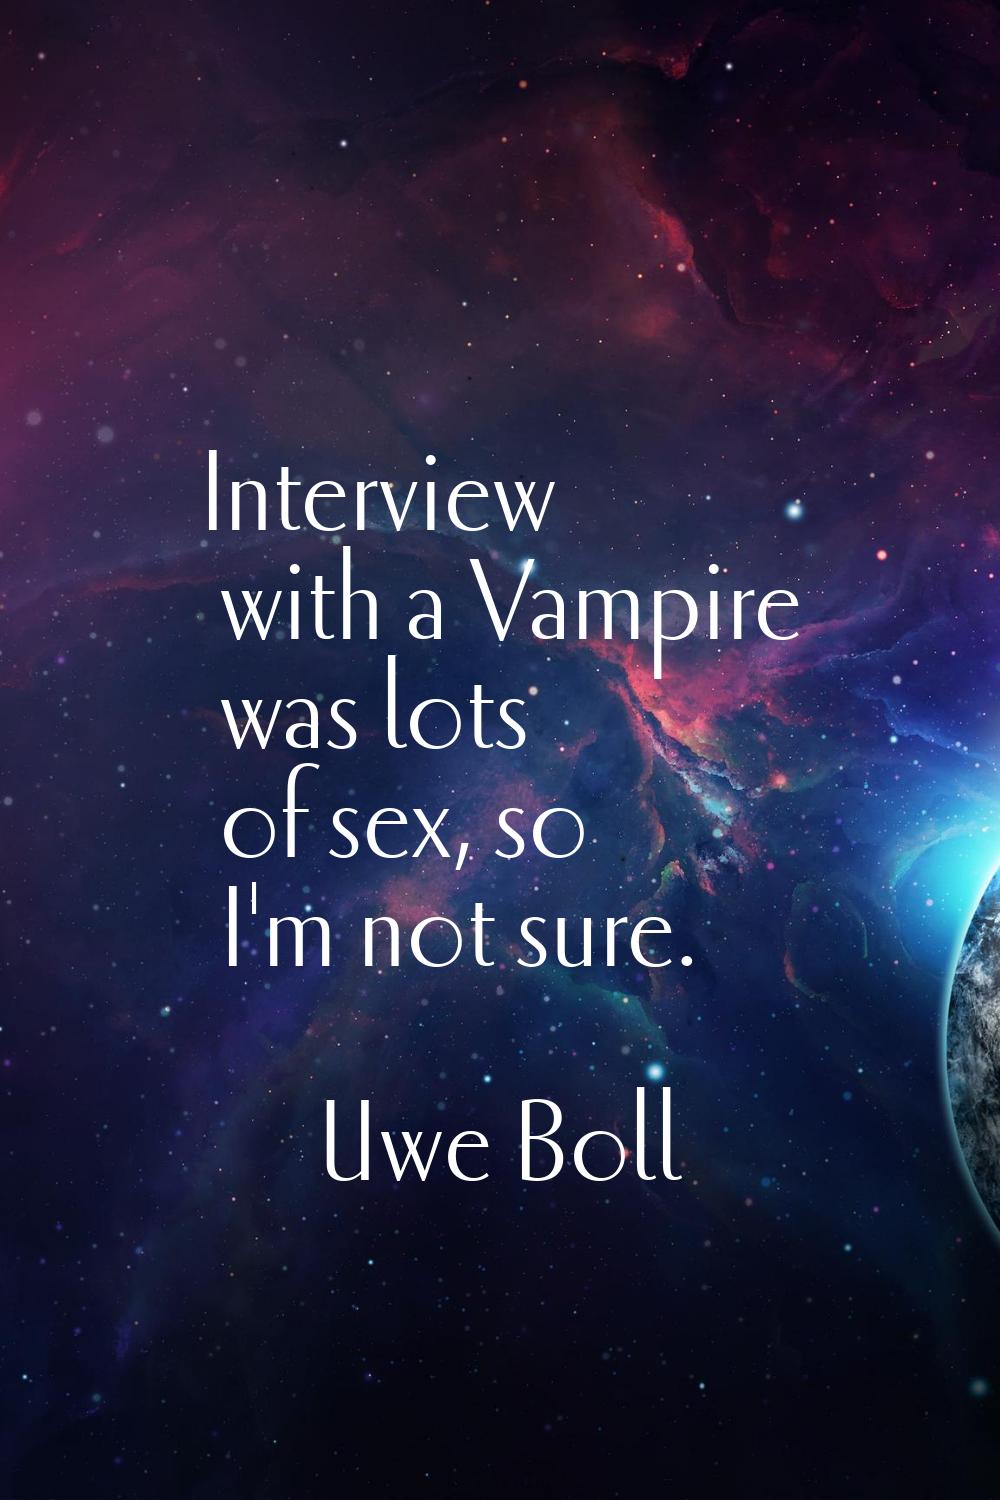 Interview with a Vampire was lots of sex, so I'm not sure.